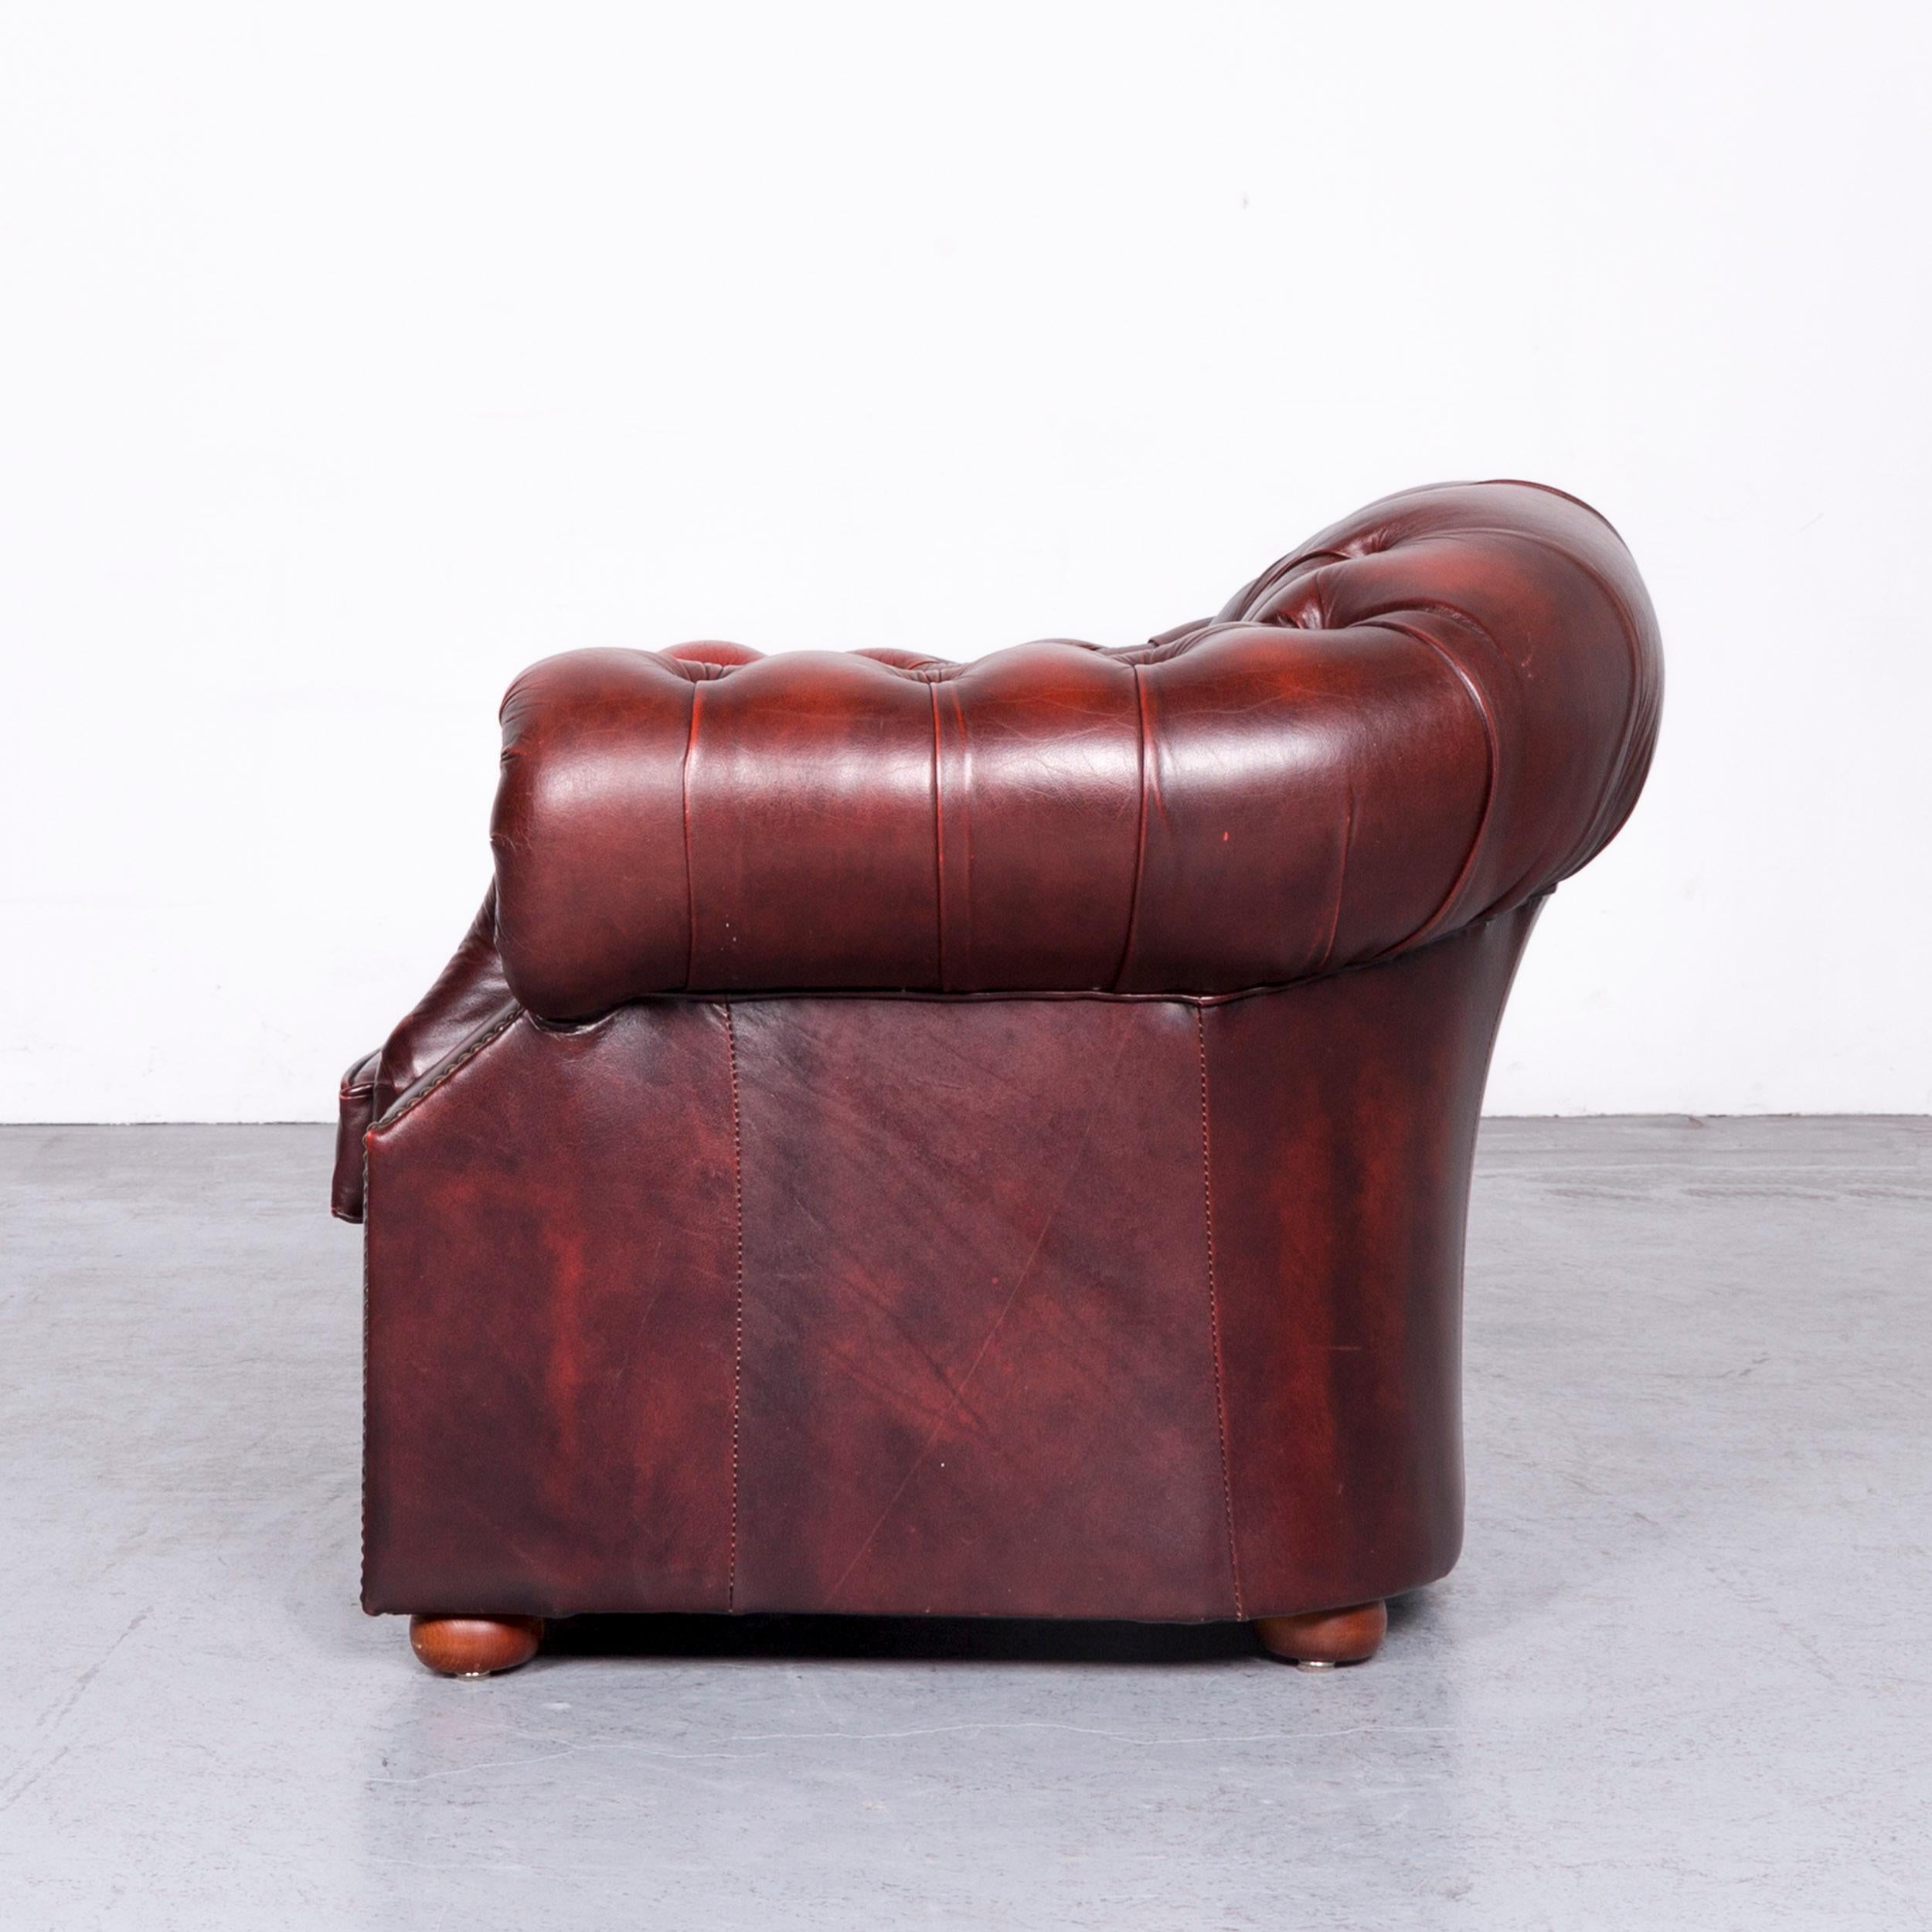 Chesterfield Centurion Leather Armchair Red One-Seat Vintage Chair 1